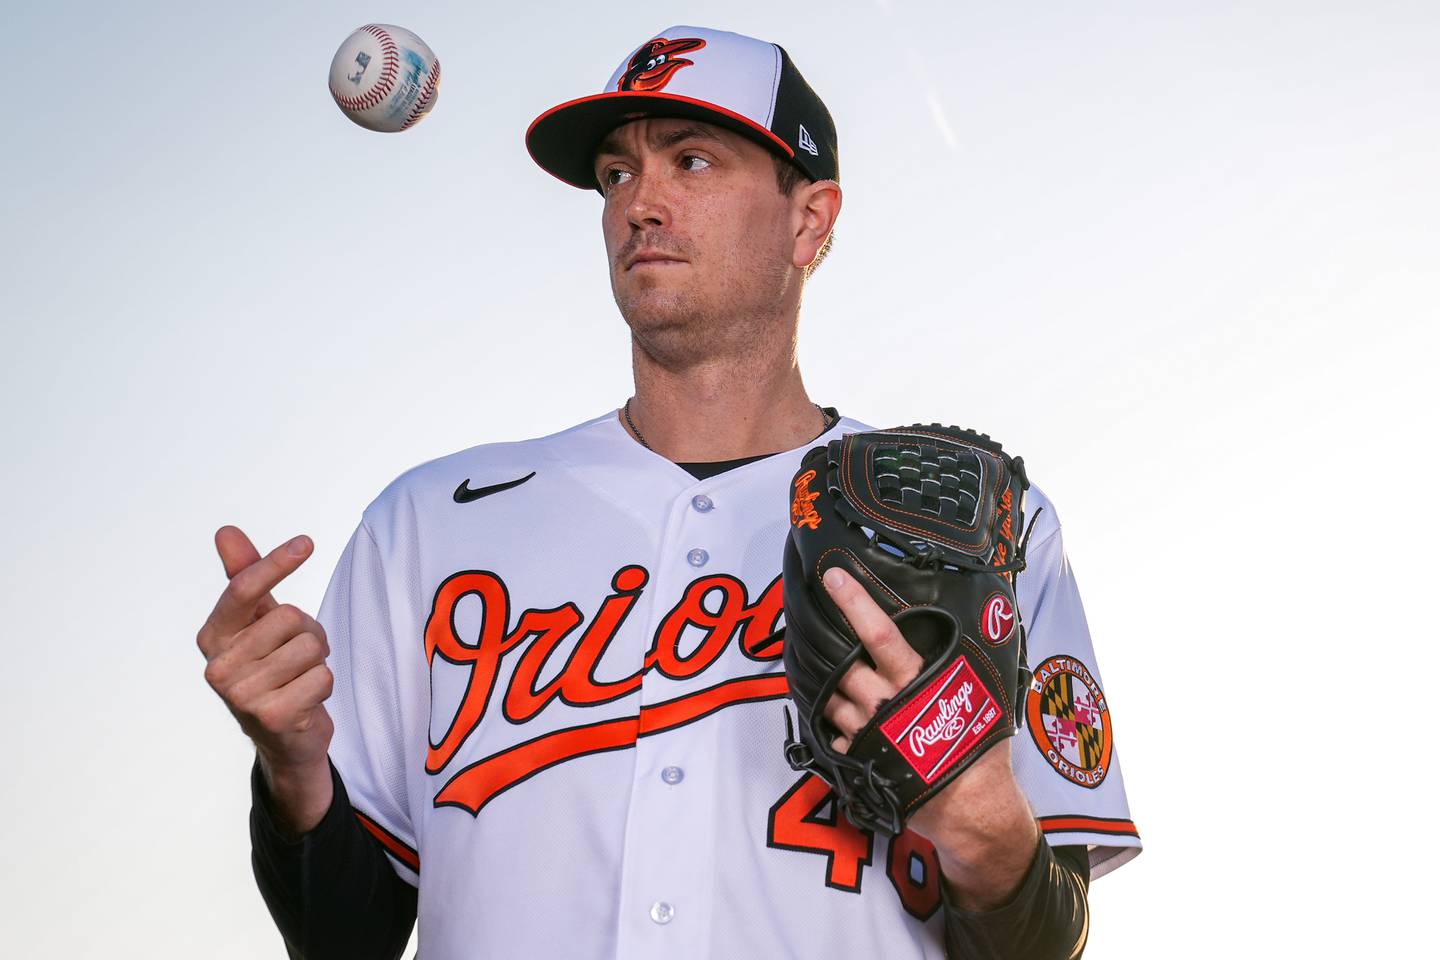 Kyle Gibson (48) poses for a portrait during Photo Day at Ed Smith Stadium in Sarasota on 2/23/23. The Baltimore Orioles’ Spring Training session runs from mid-February through the end of March.